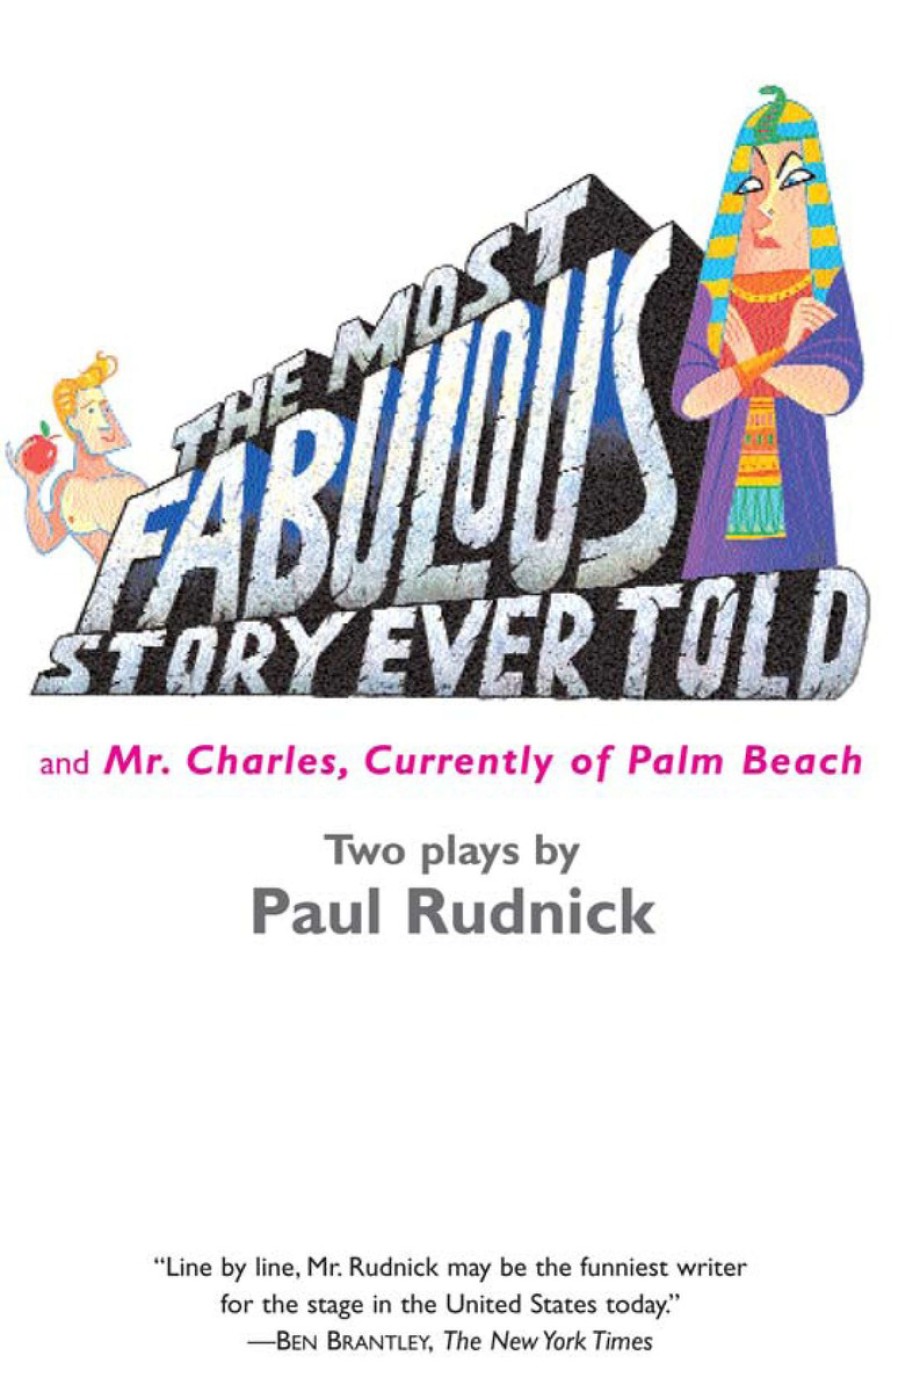 Most Fabulous Story Ever Told And Mr. Charles, Currently of Palm Beach